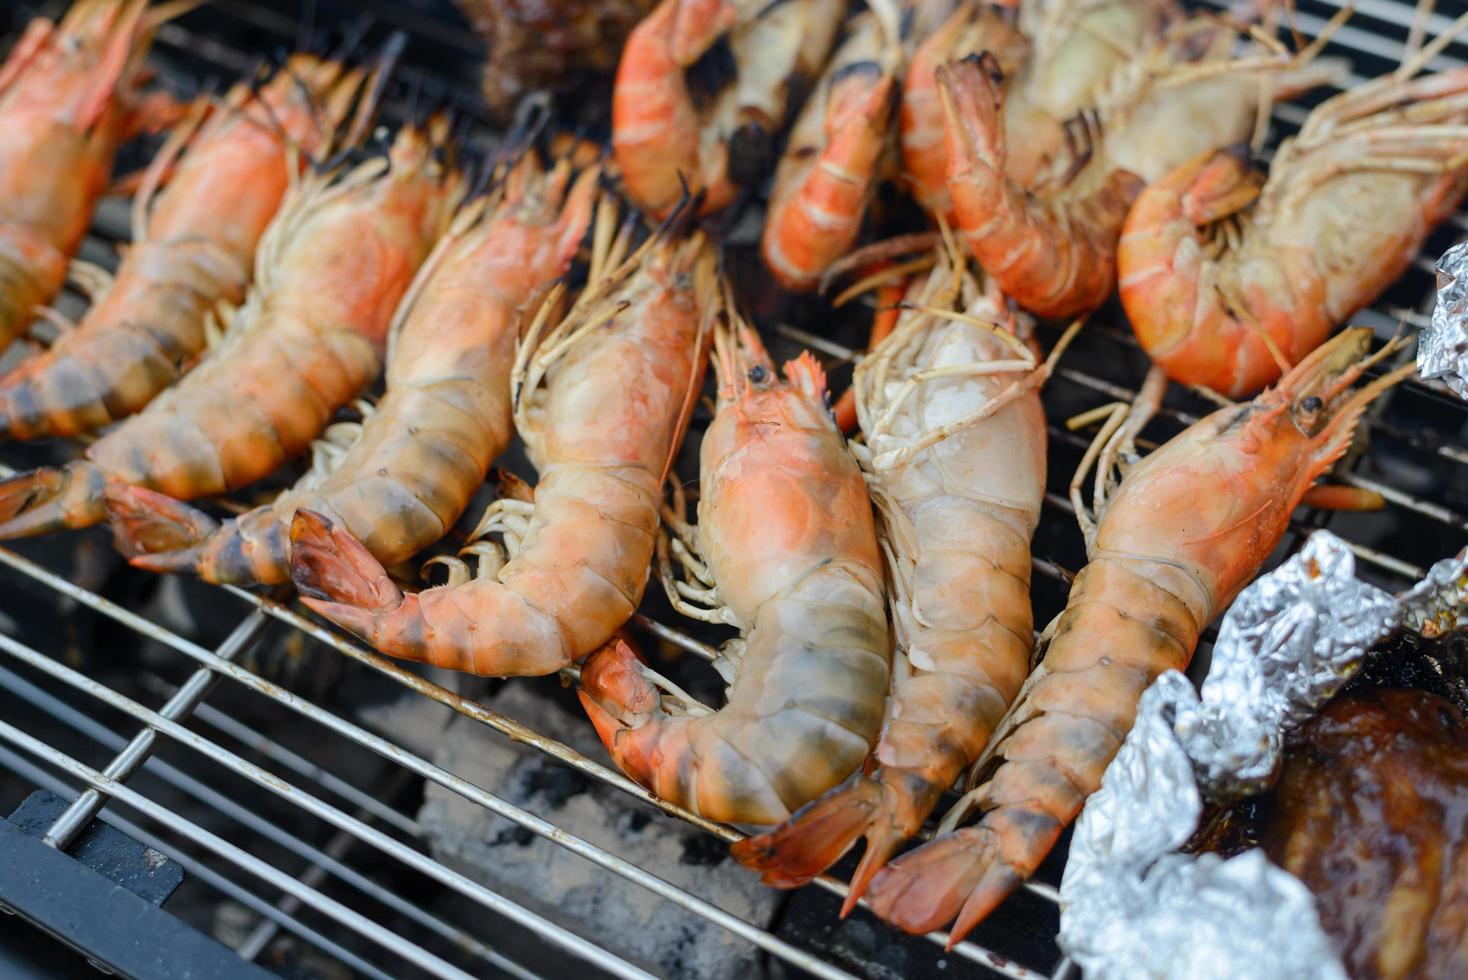 shrimps grilled on the charcoal stove, bbq seafood photo